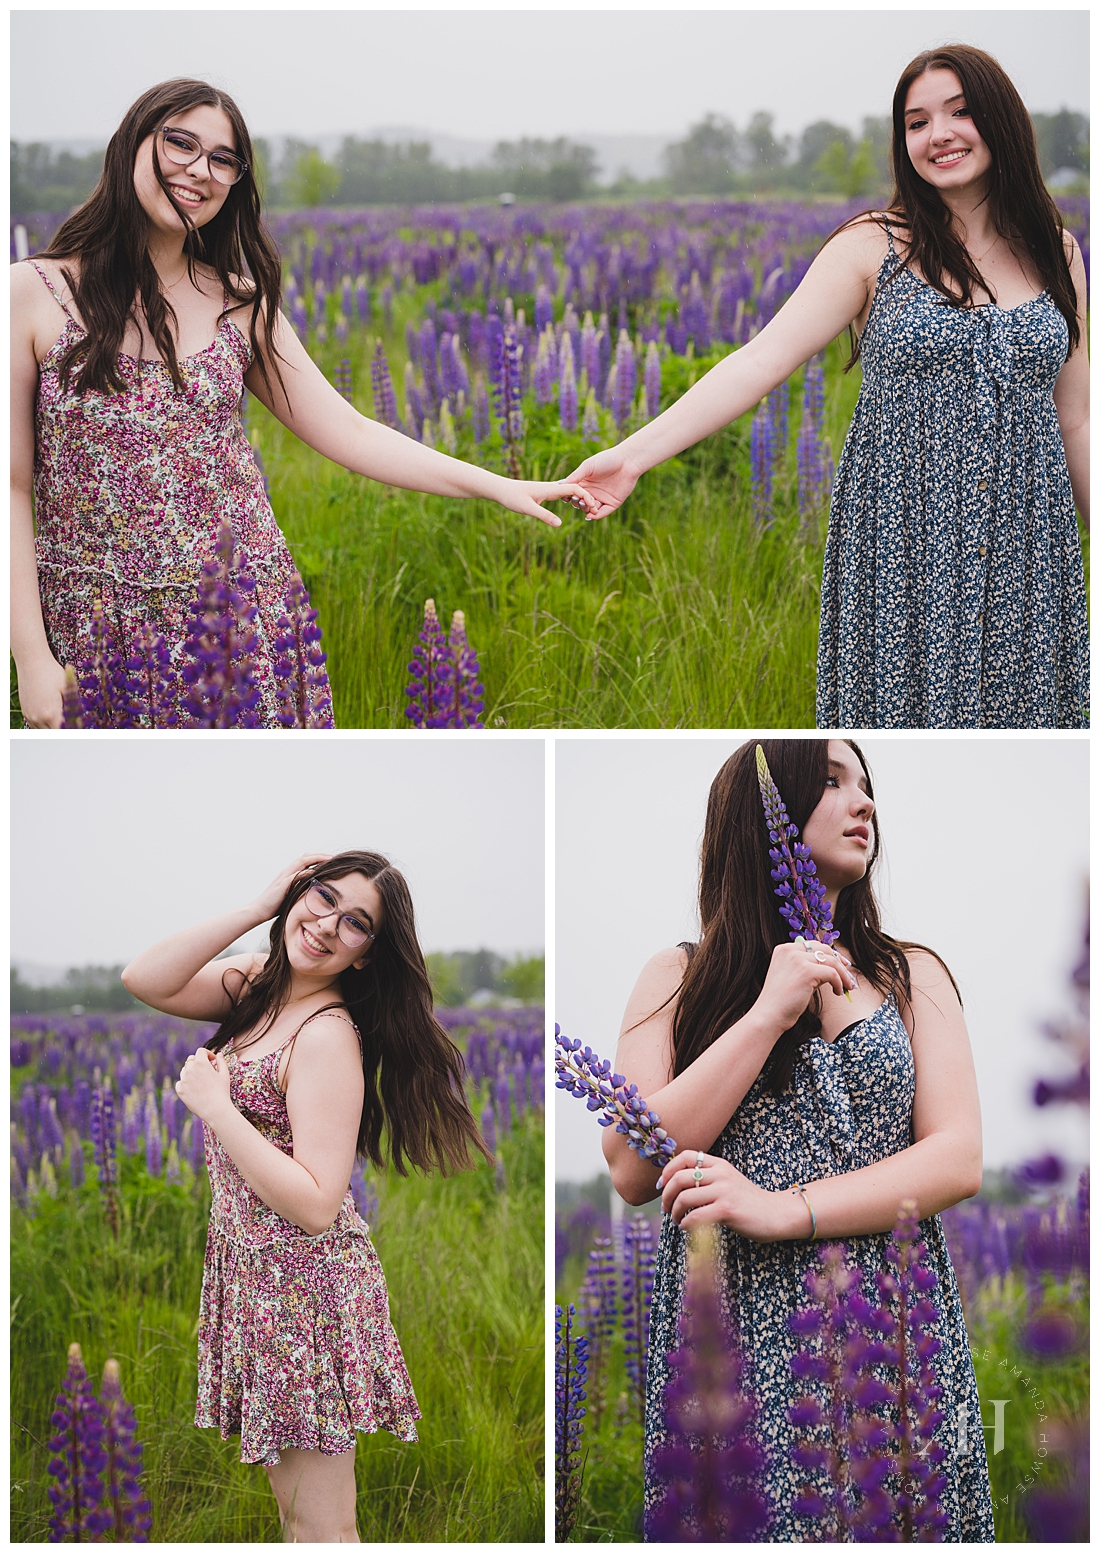 Spring BFF Photos in Flower Field | Puyallup Flower Farm | Photographed by the Best Tacoma, Washington Senior Photographer Amanda Howse Photography